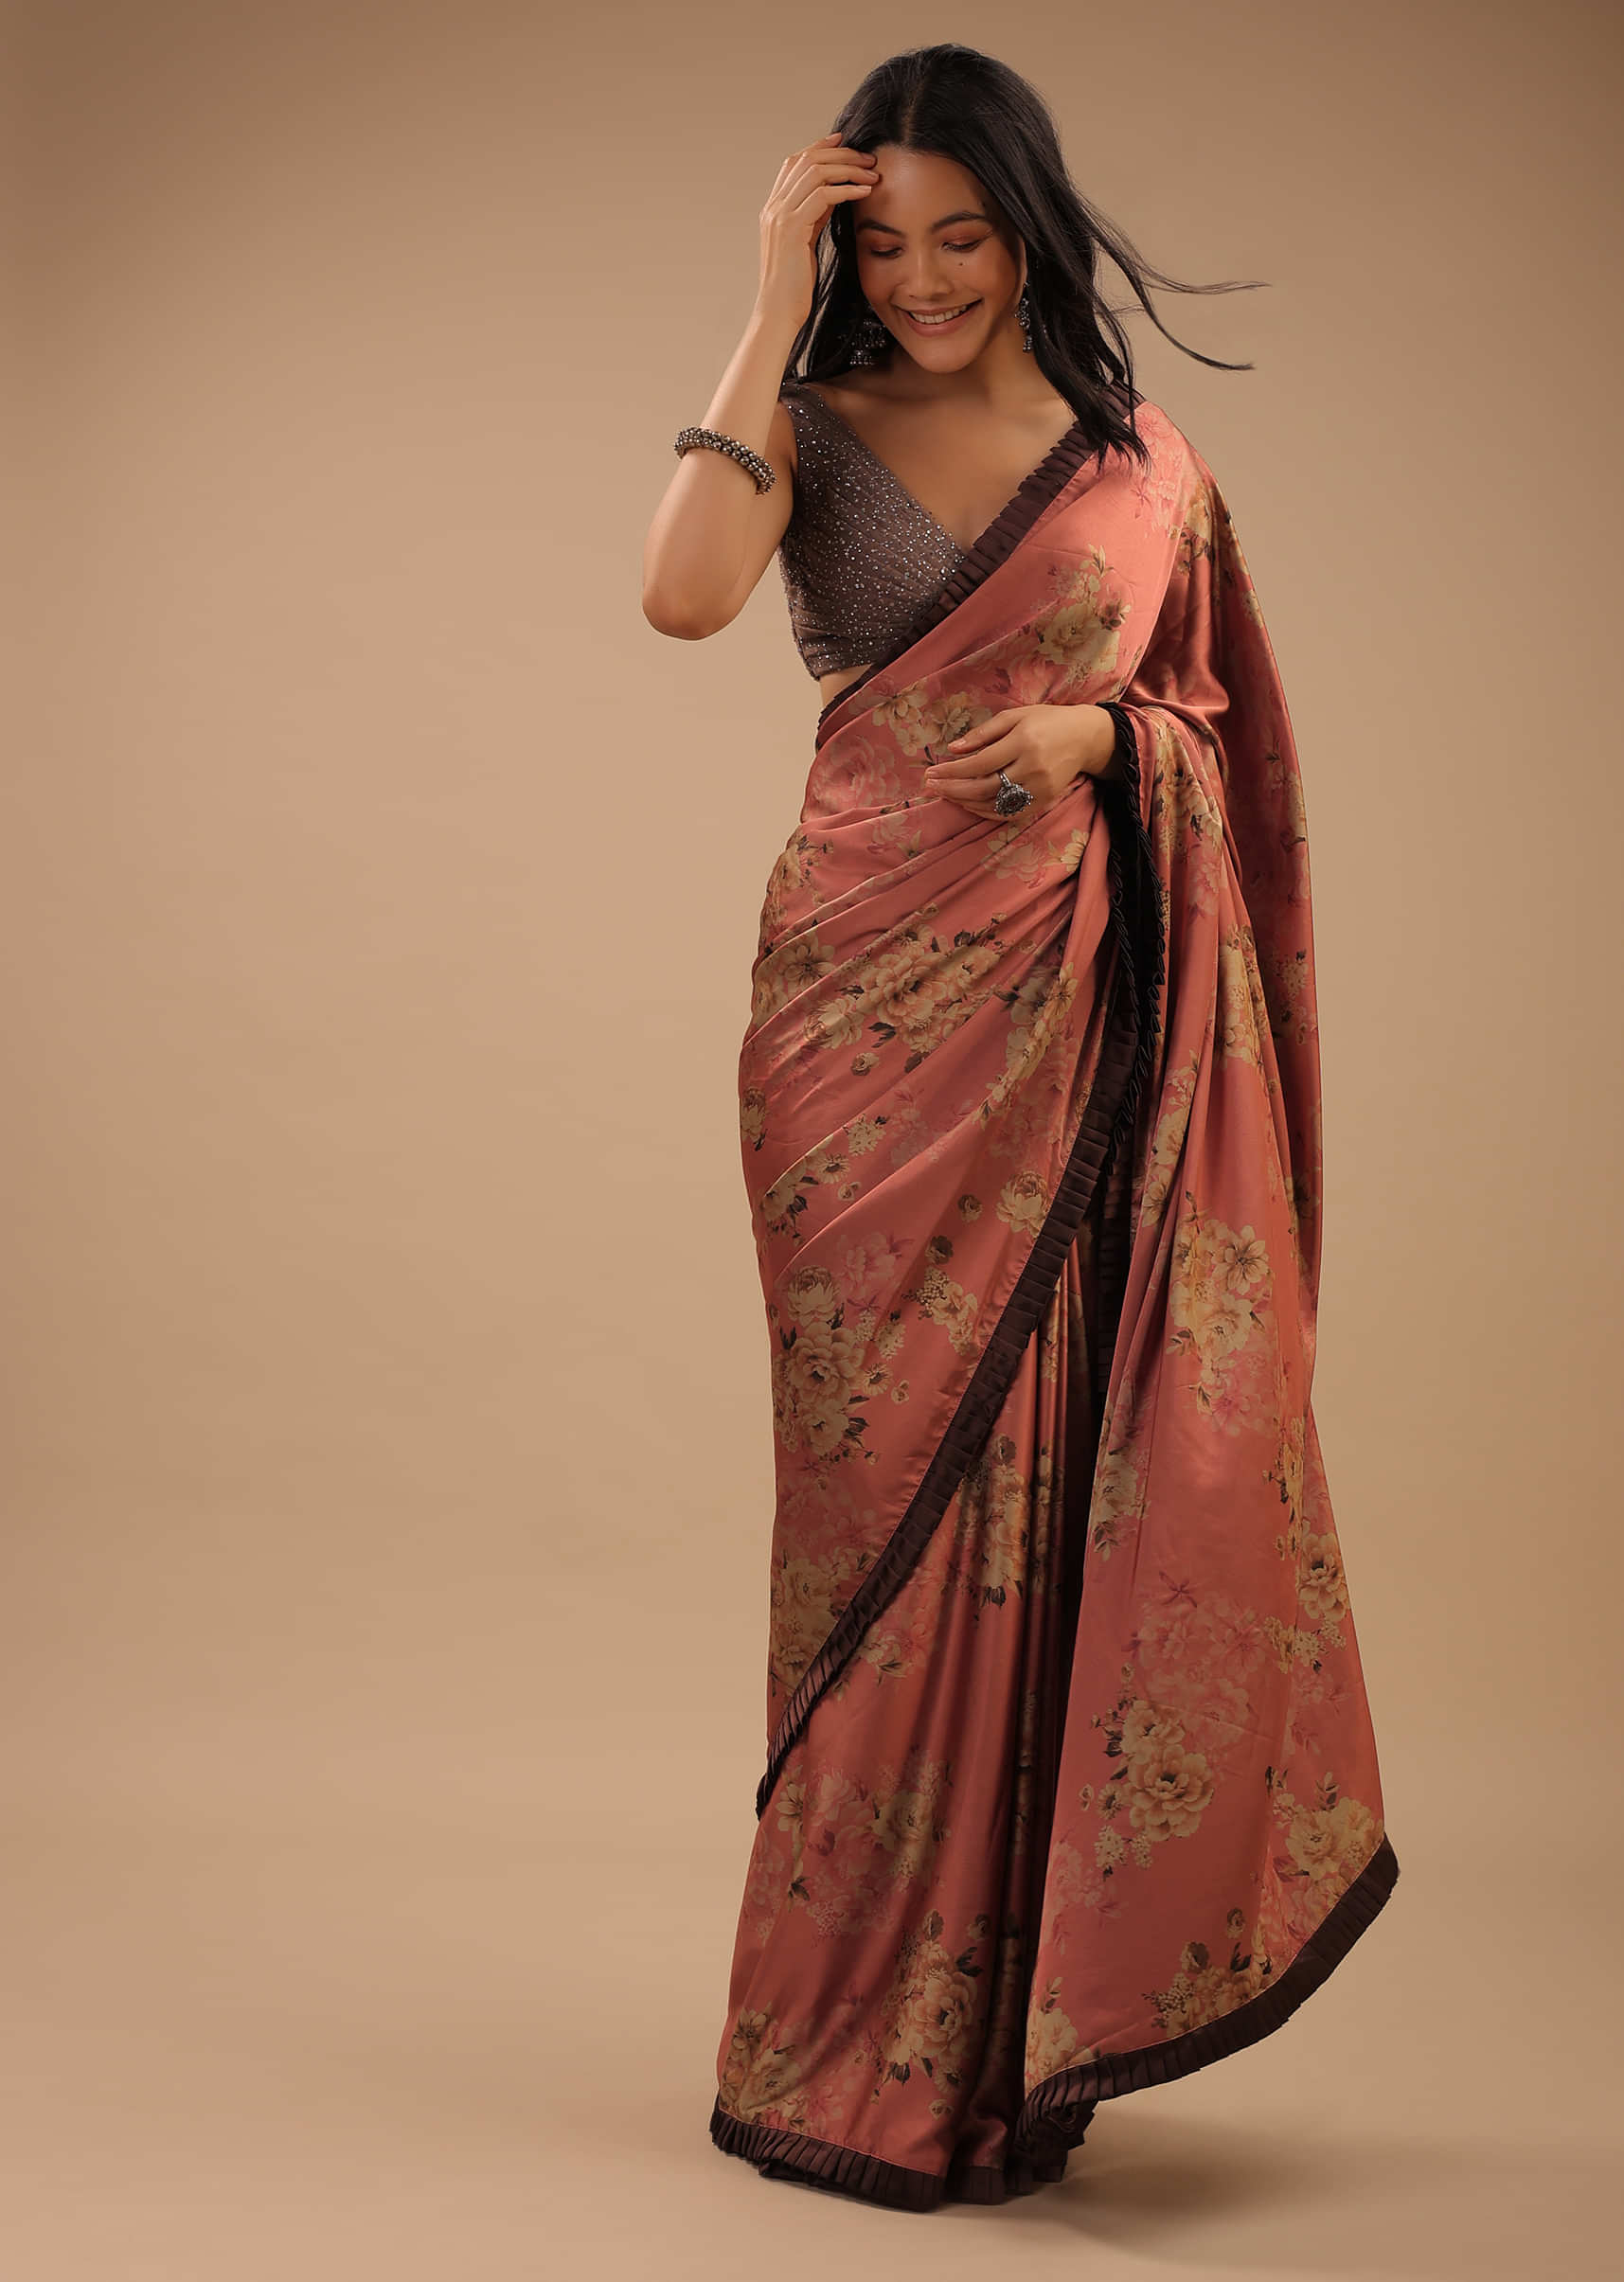 Coral Peach Saree With Brown Frill Borders And Floral Print